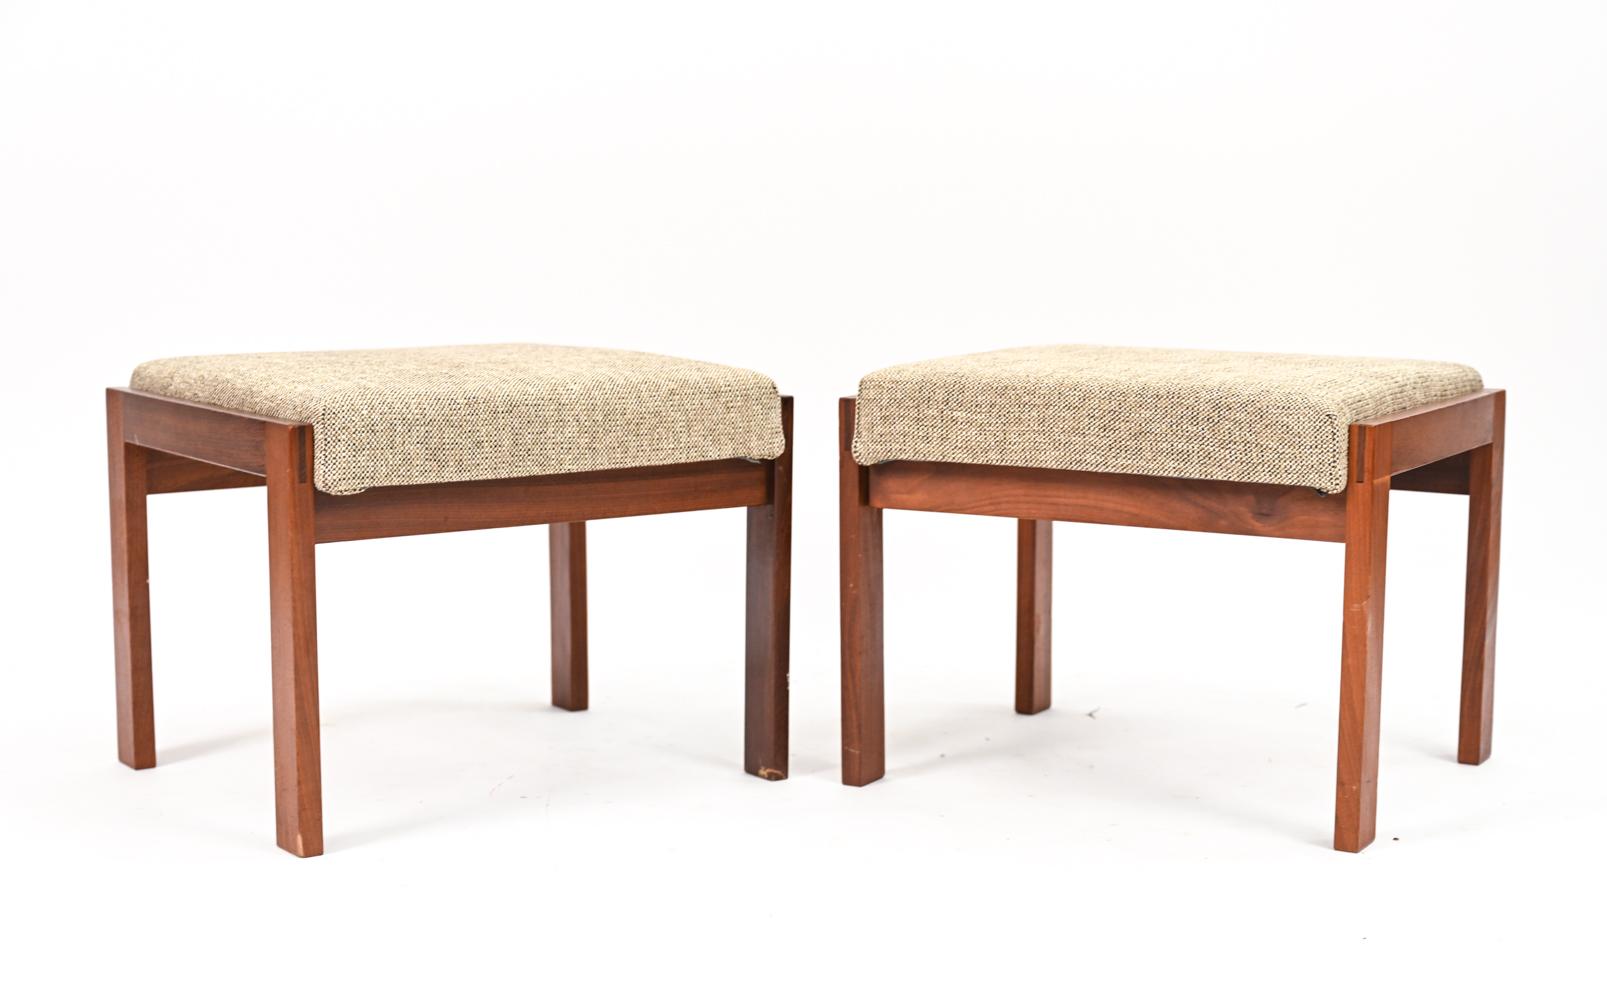 A stylish pair of Danish mid-century footstools or ottomans in handsomely grained teak with new finely checkered knit fabric in neutral earth tones. These Scandinavian modern stools are in the manner of Illum Wikkelso and Kai Kristiansen's